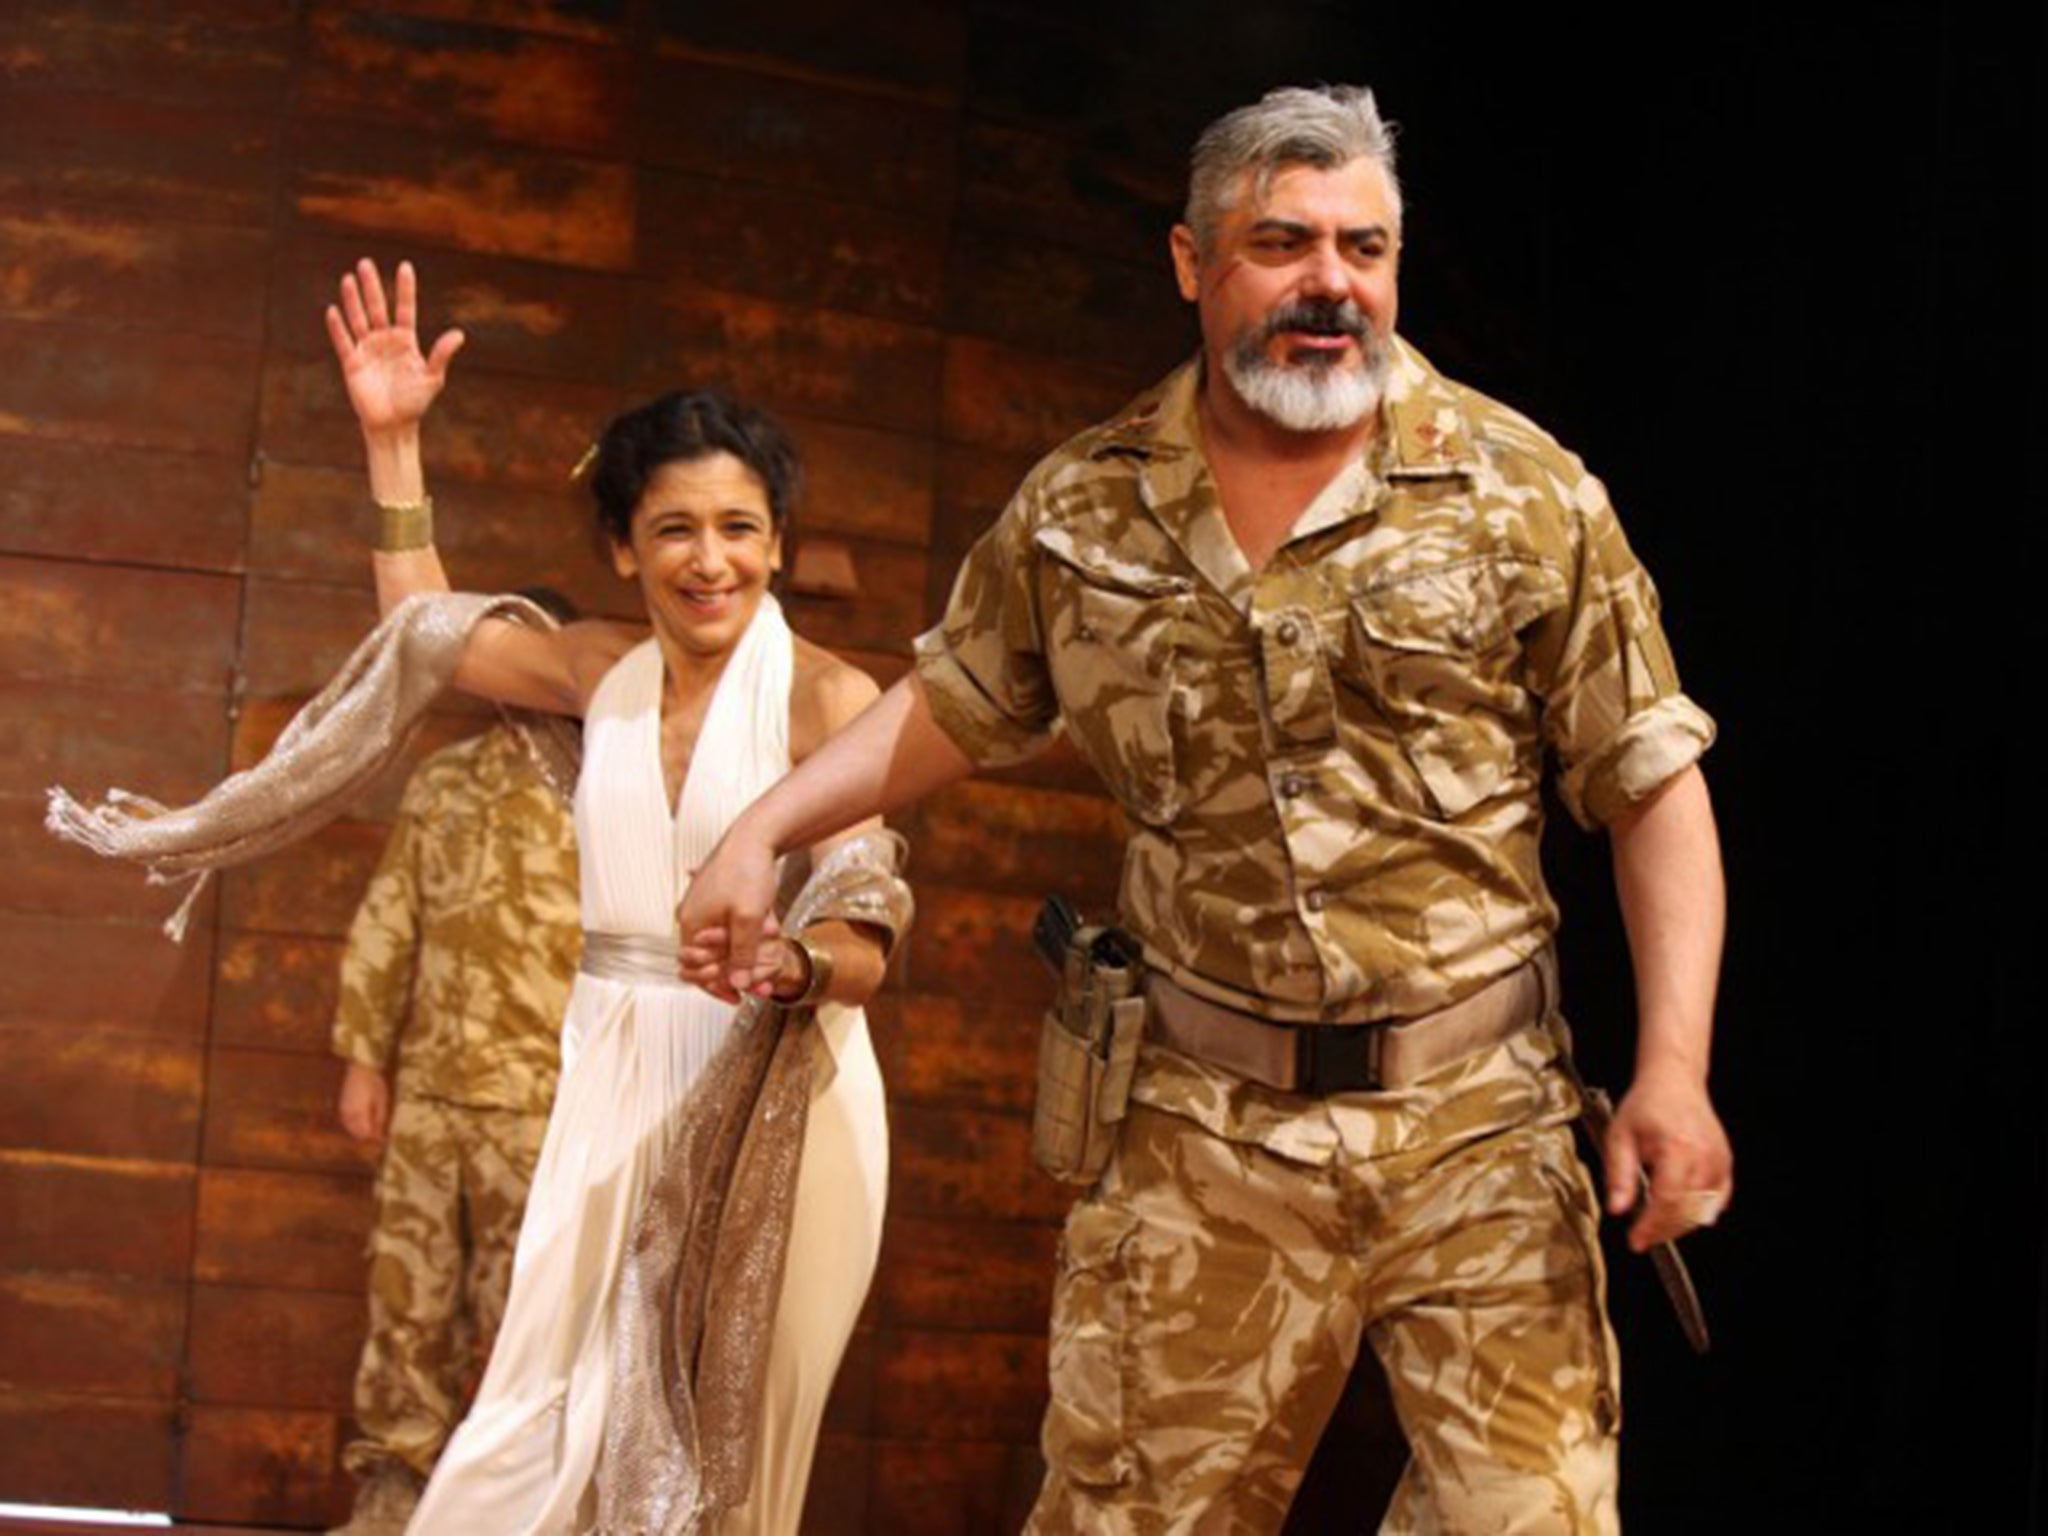 The RSC’s 2010 production of ‘Antony and Cleopatra’ had Kathryn Hunter and Darrell D’Silva in the title roles